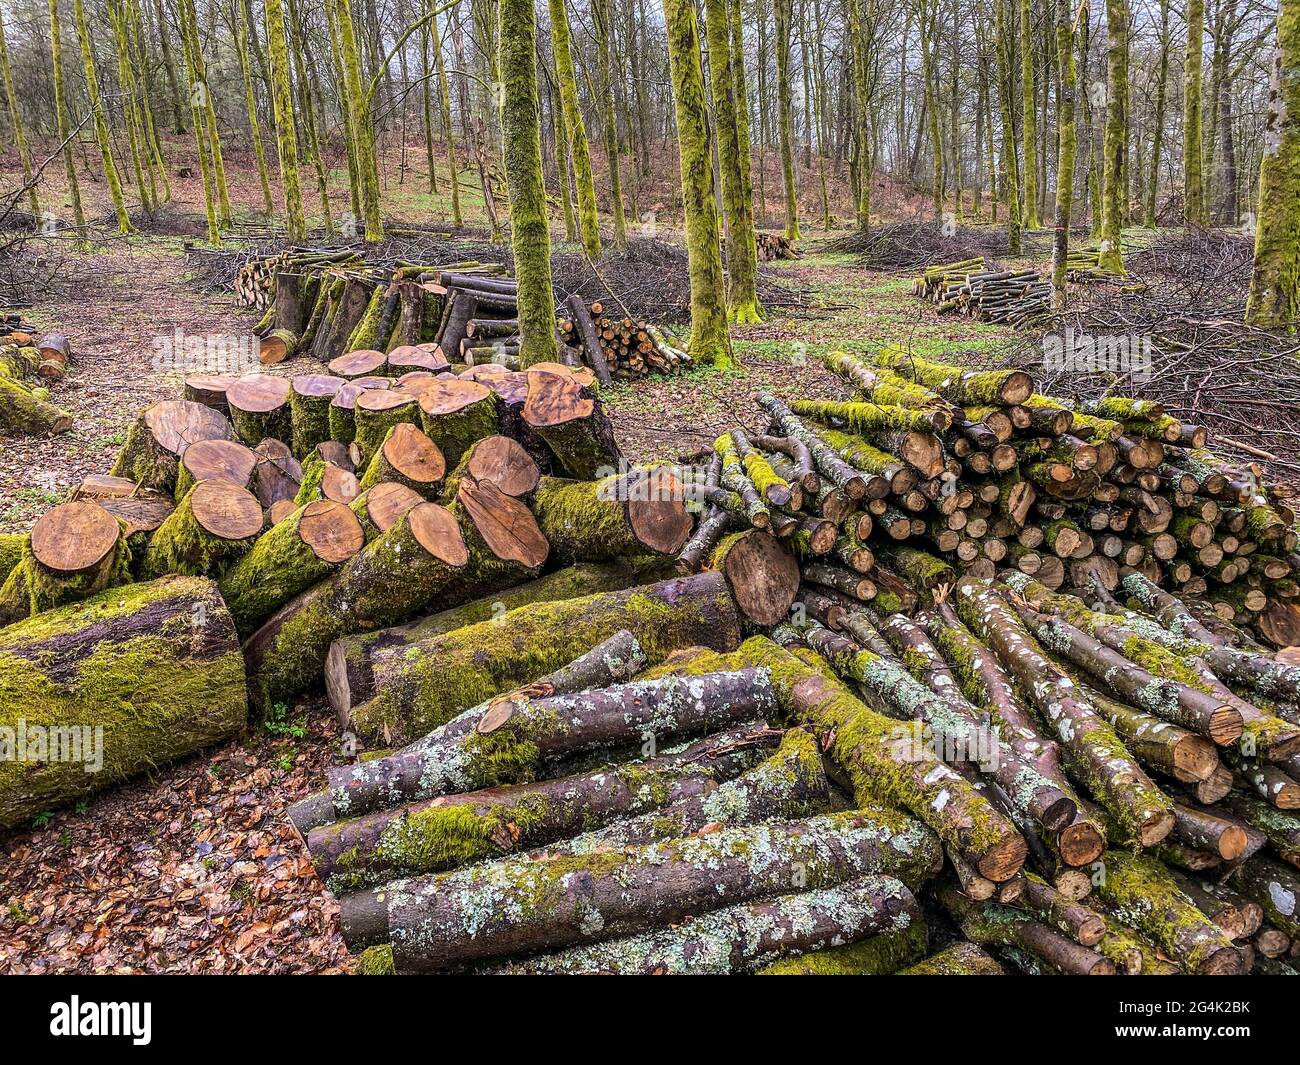 forest management, Forestry work, in a broadleaf forest, Stack of cut tree logs in a Virton forest, Luxembourg, Belgium Stock Photo